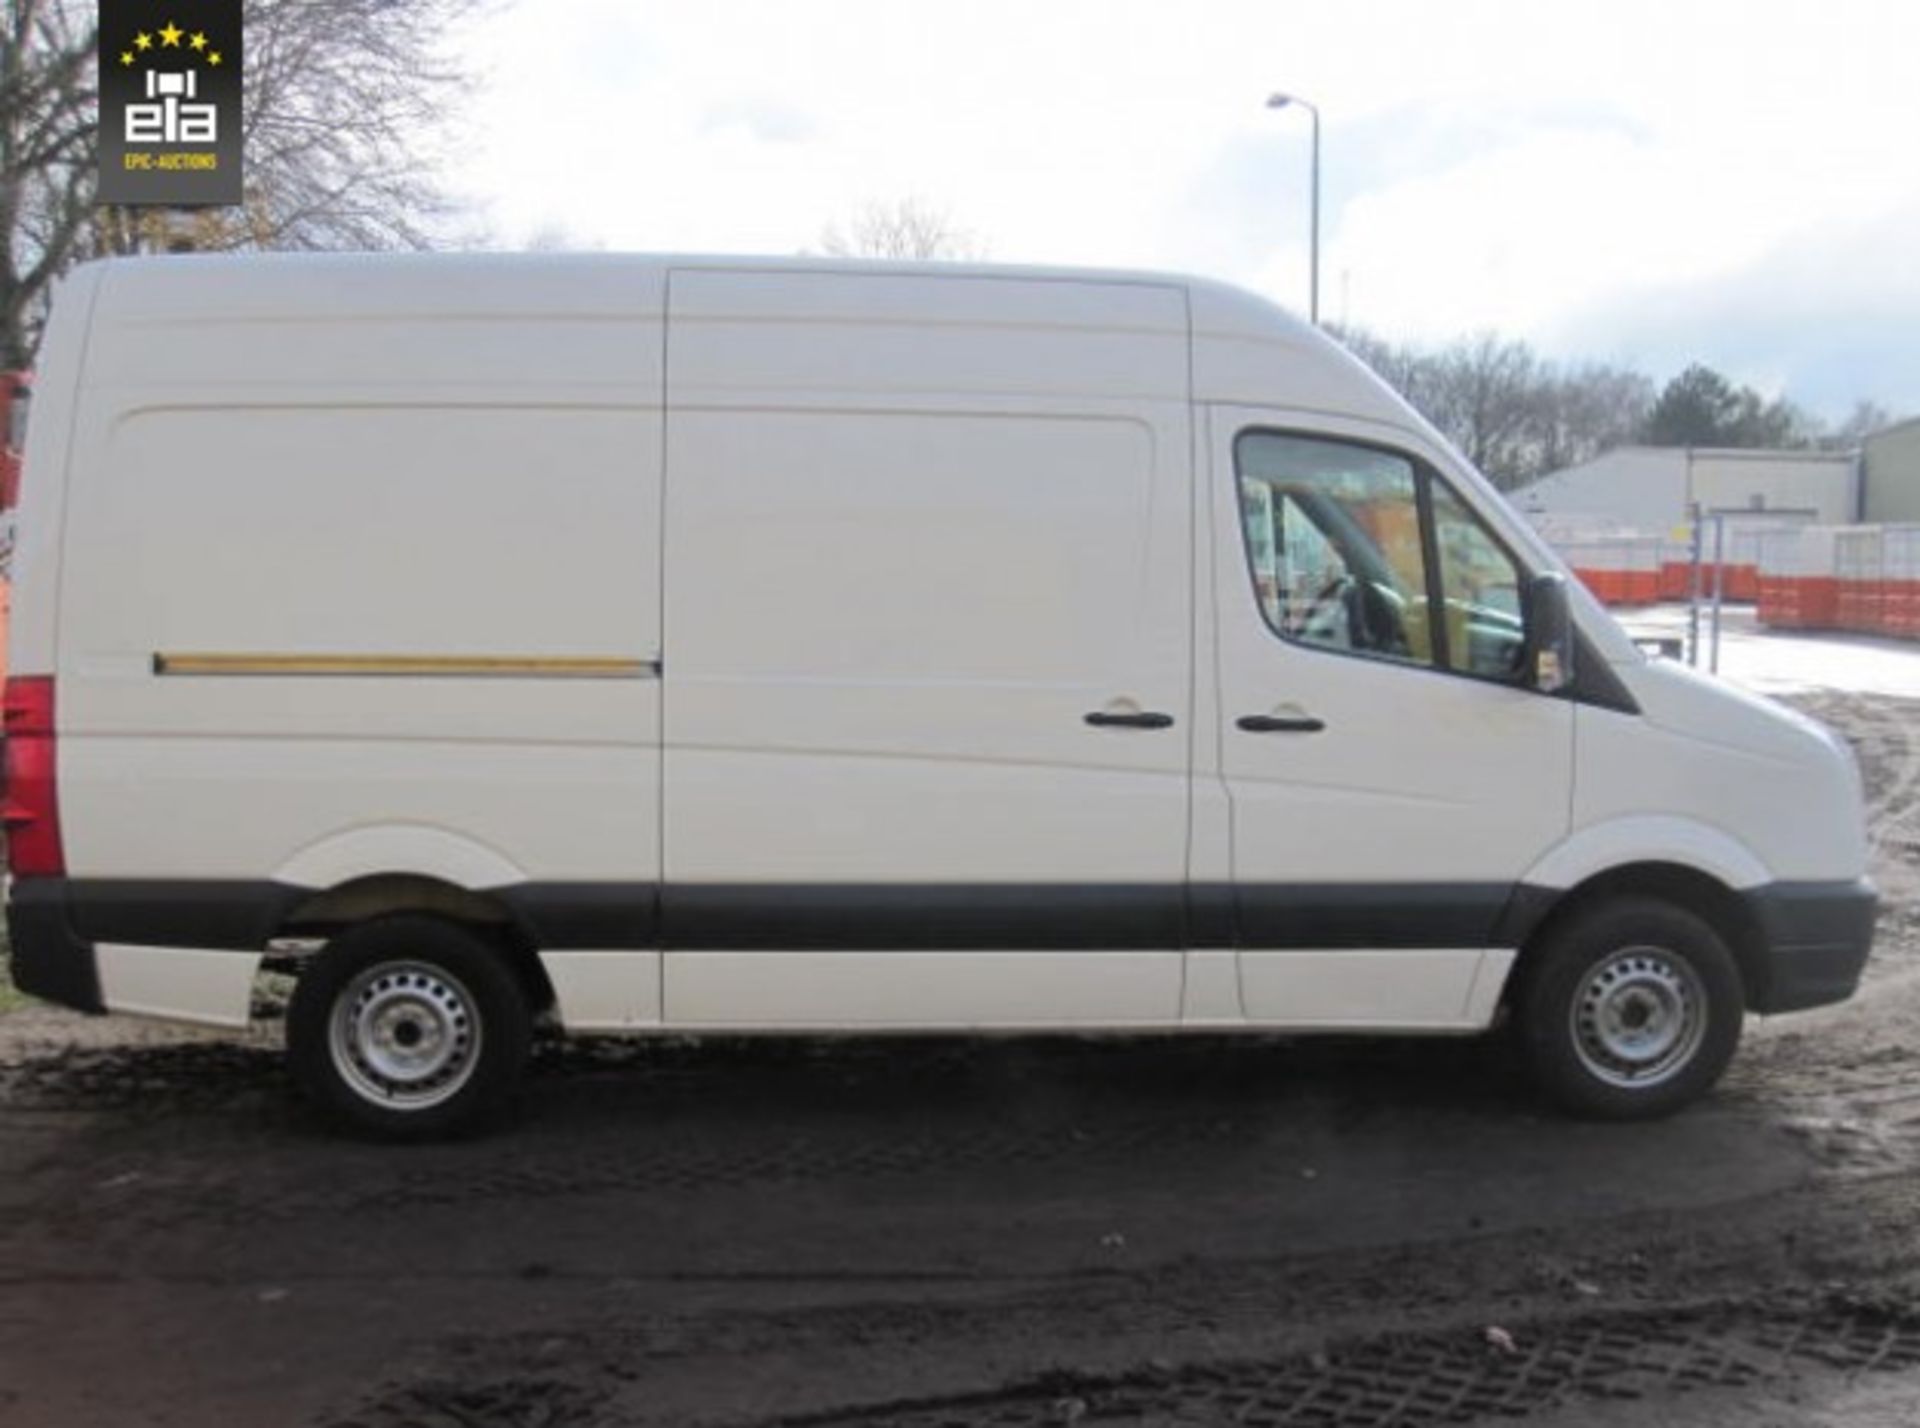 2011 Volkswagen Crafter 2.5 TDI L2H2 20151051 - Image 6 of 26